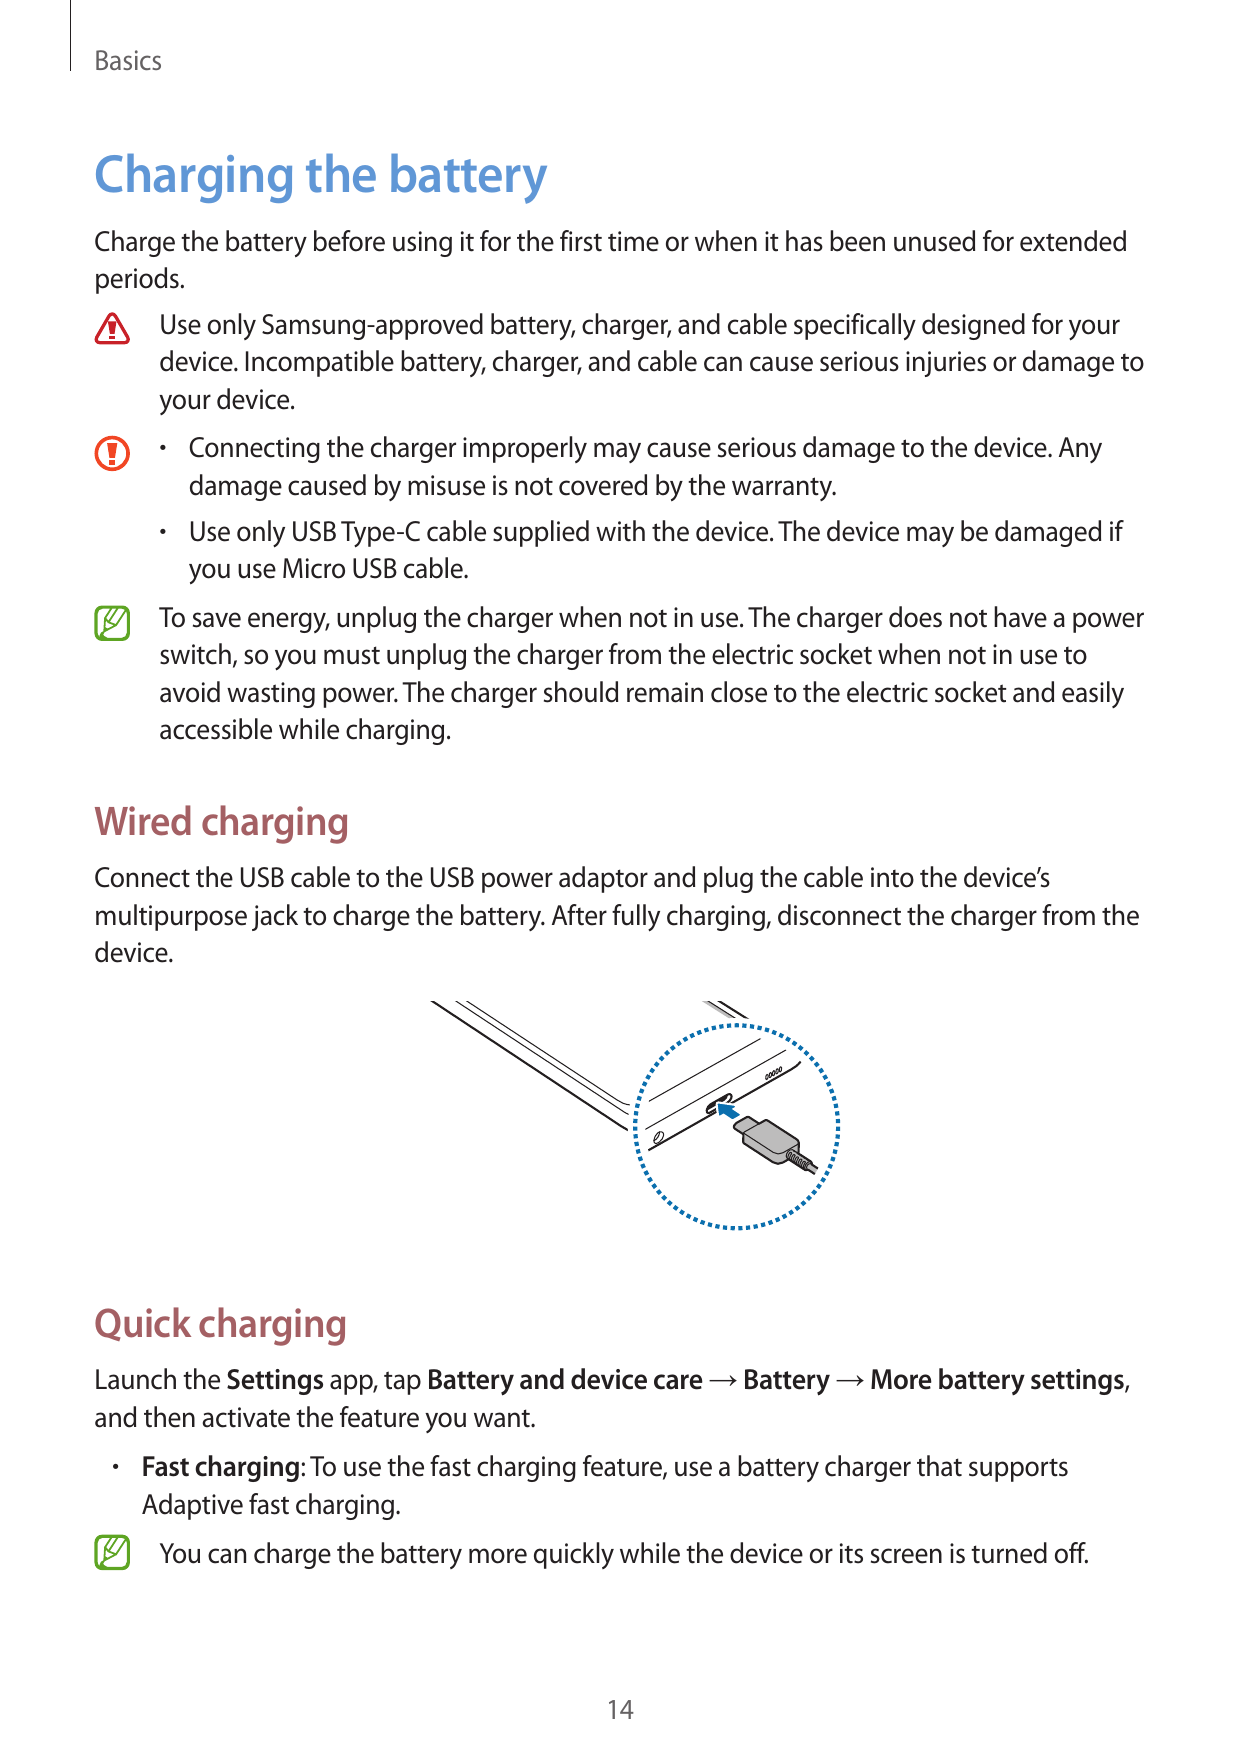 BasicsCharging the batteryCharge the battery before using it for the first time or when it has been unused for extendedperiods.U